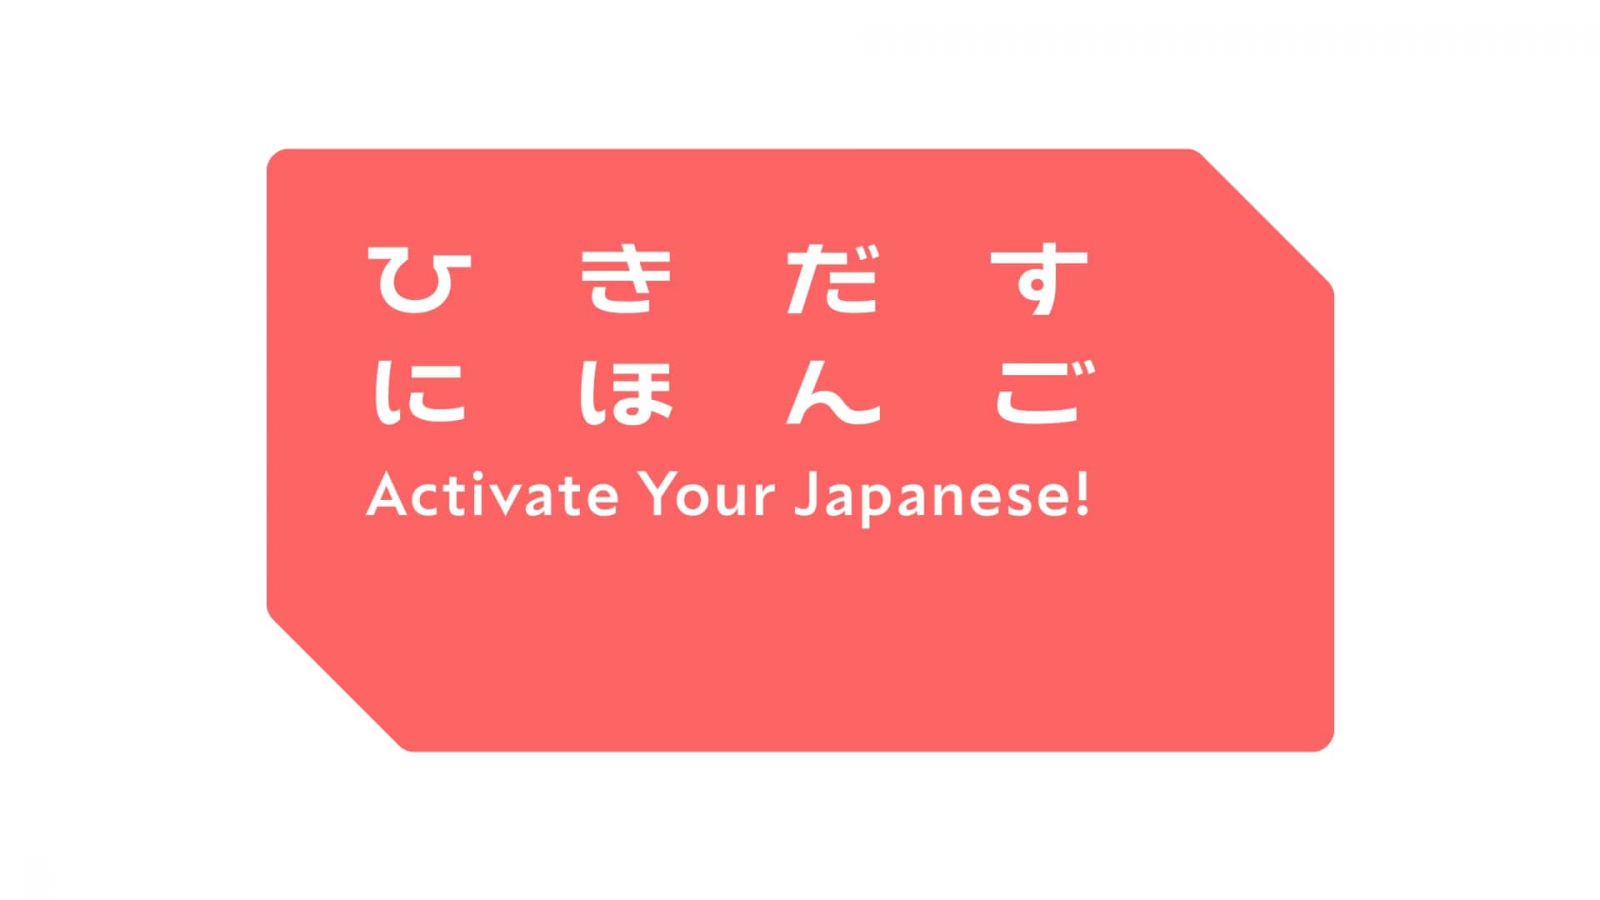 Activate your Japanese!